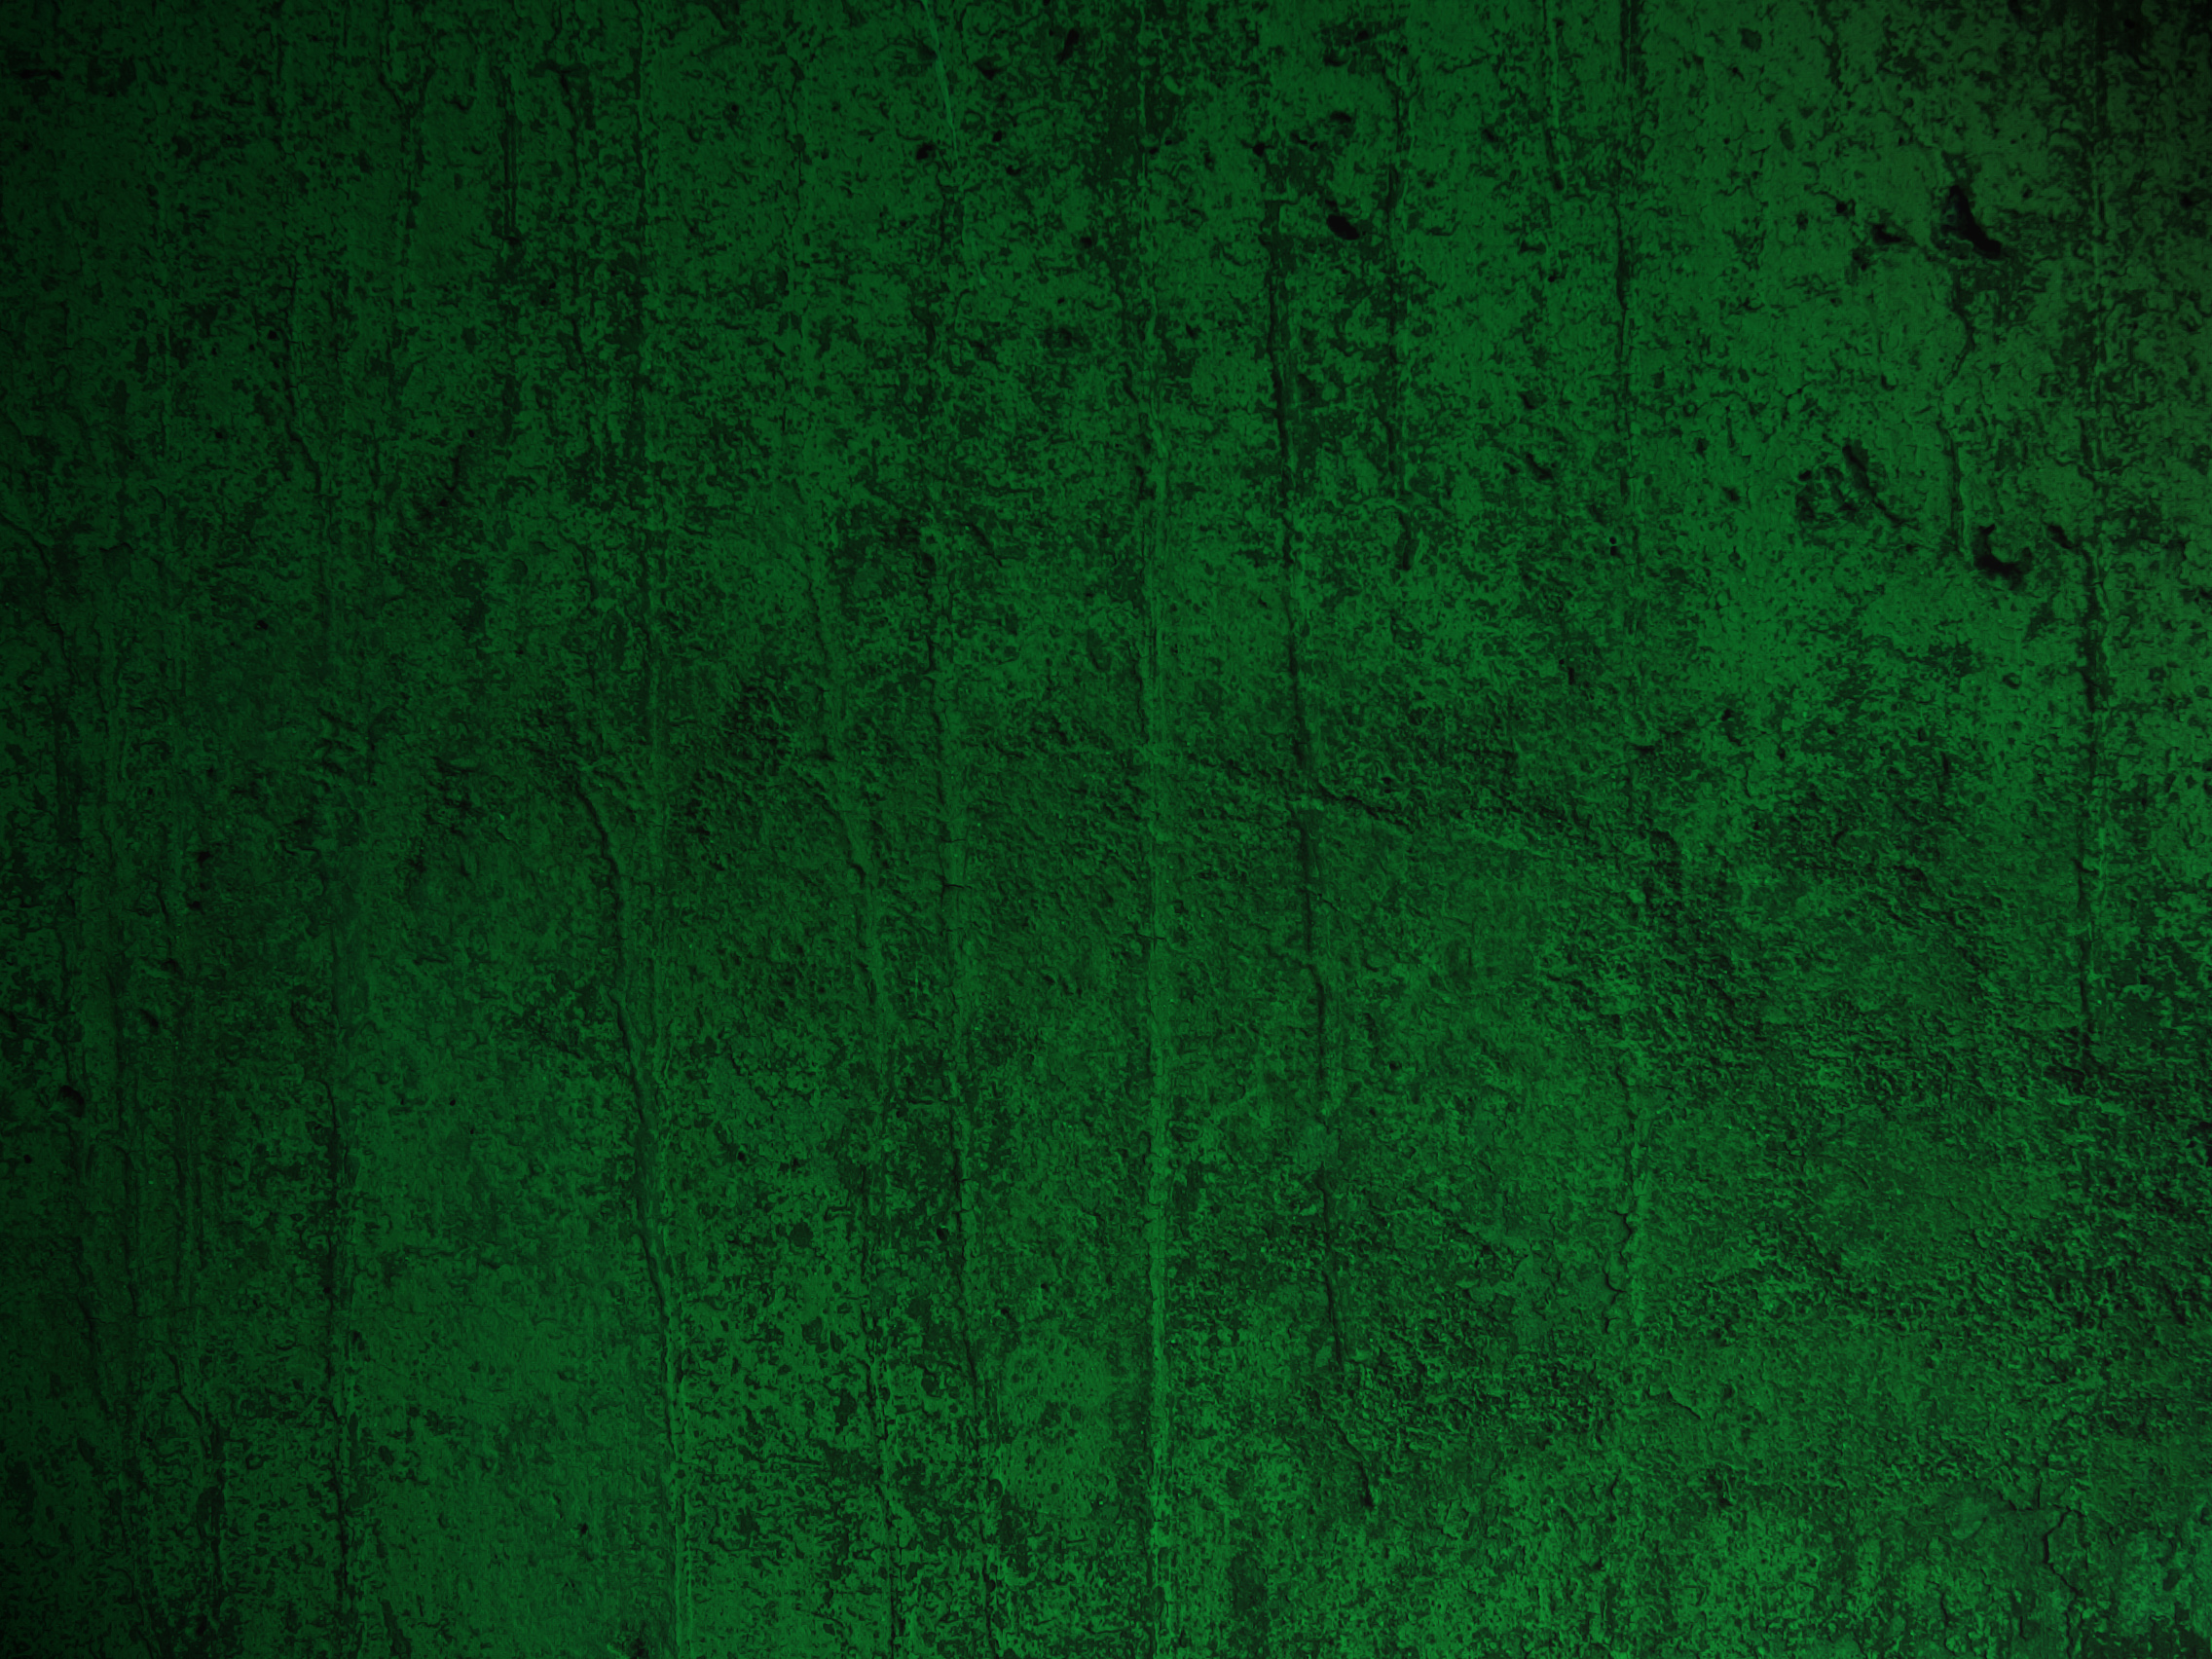 Amazing Wallpaper Green And Gold in the world Unlock more insights!